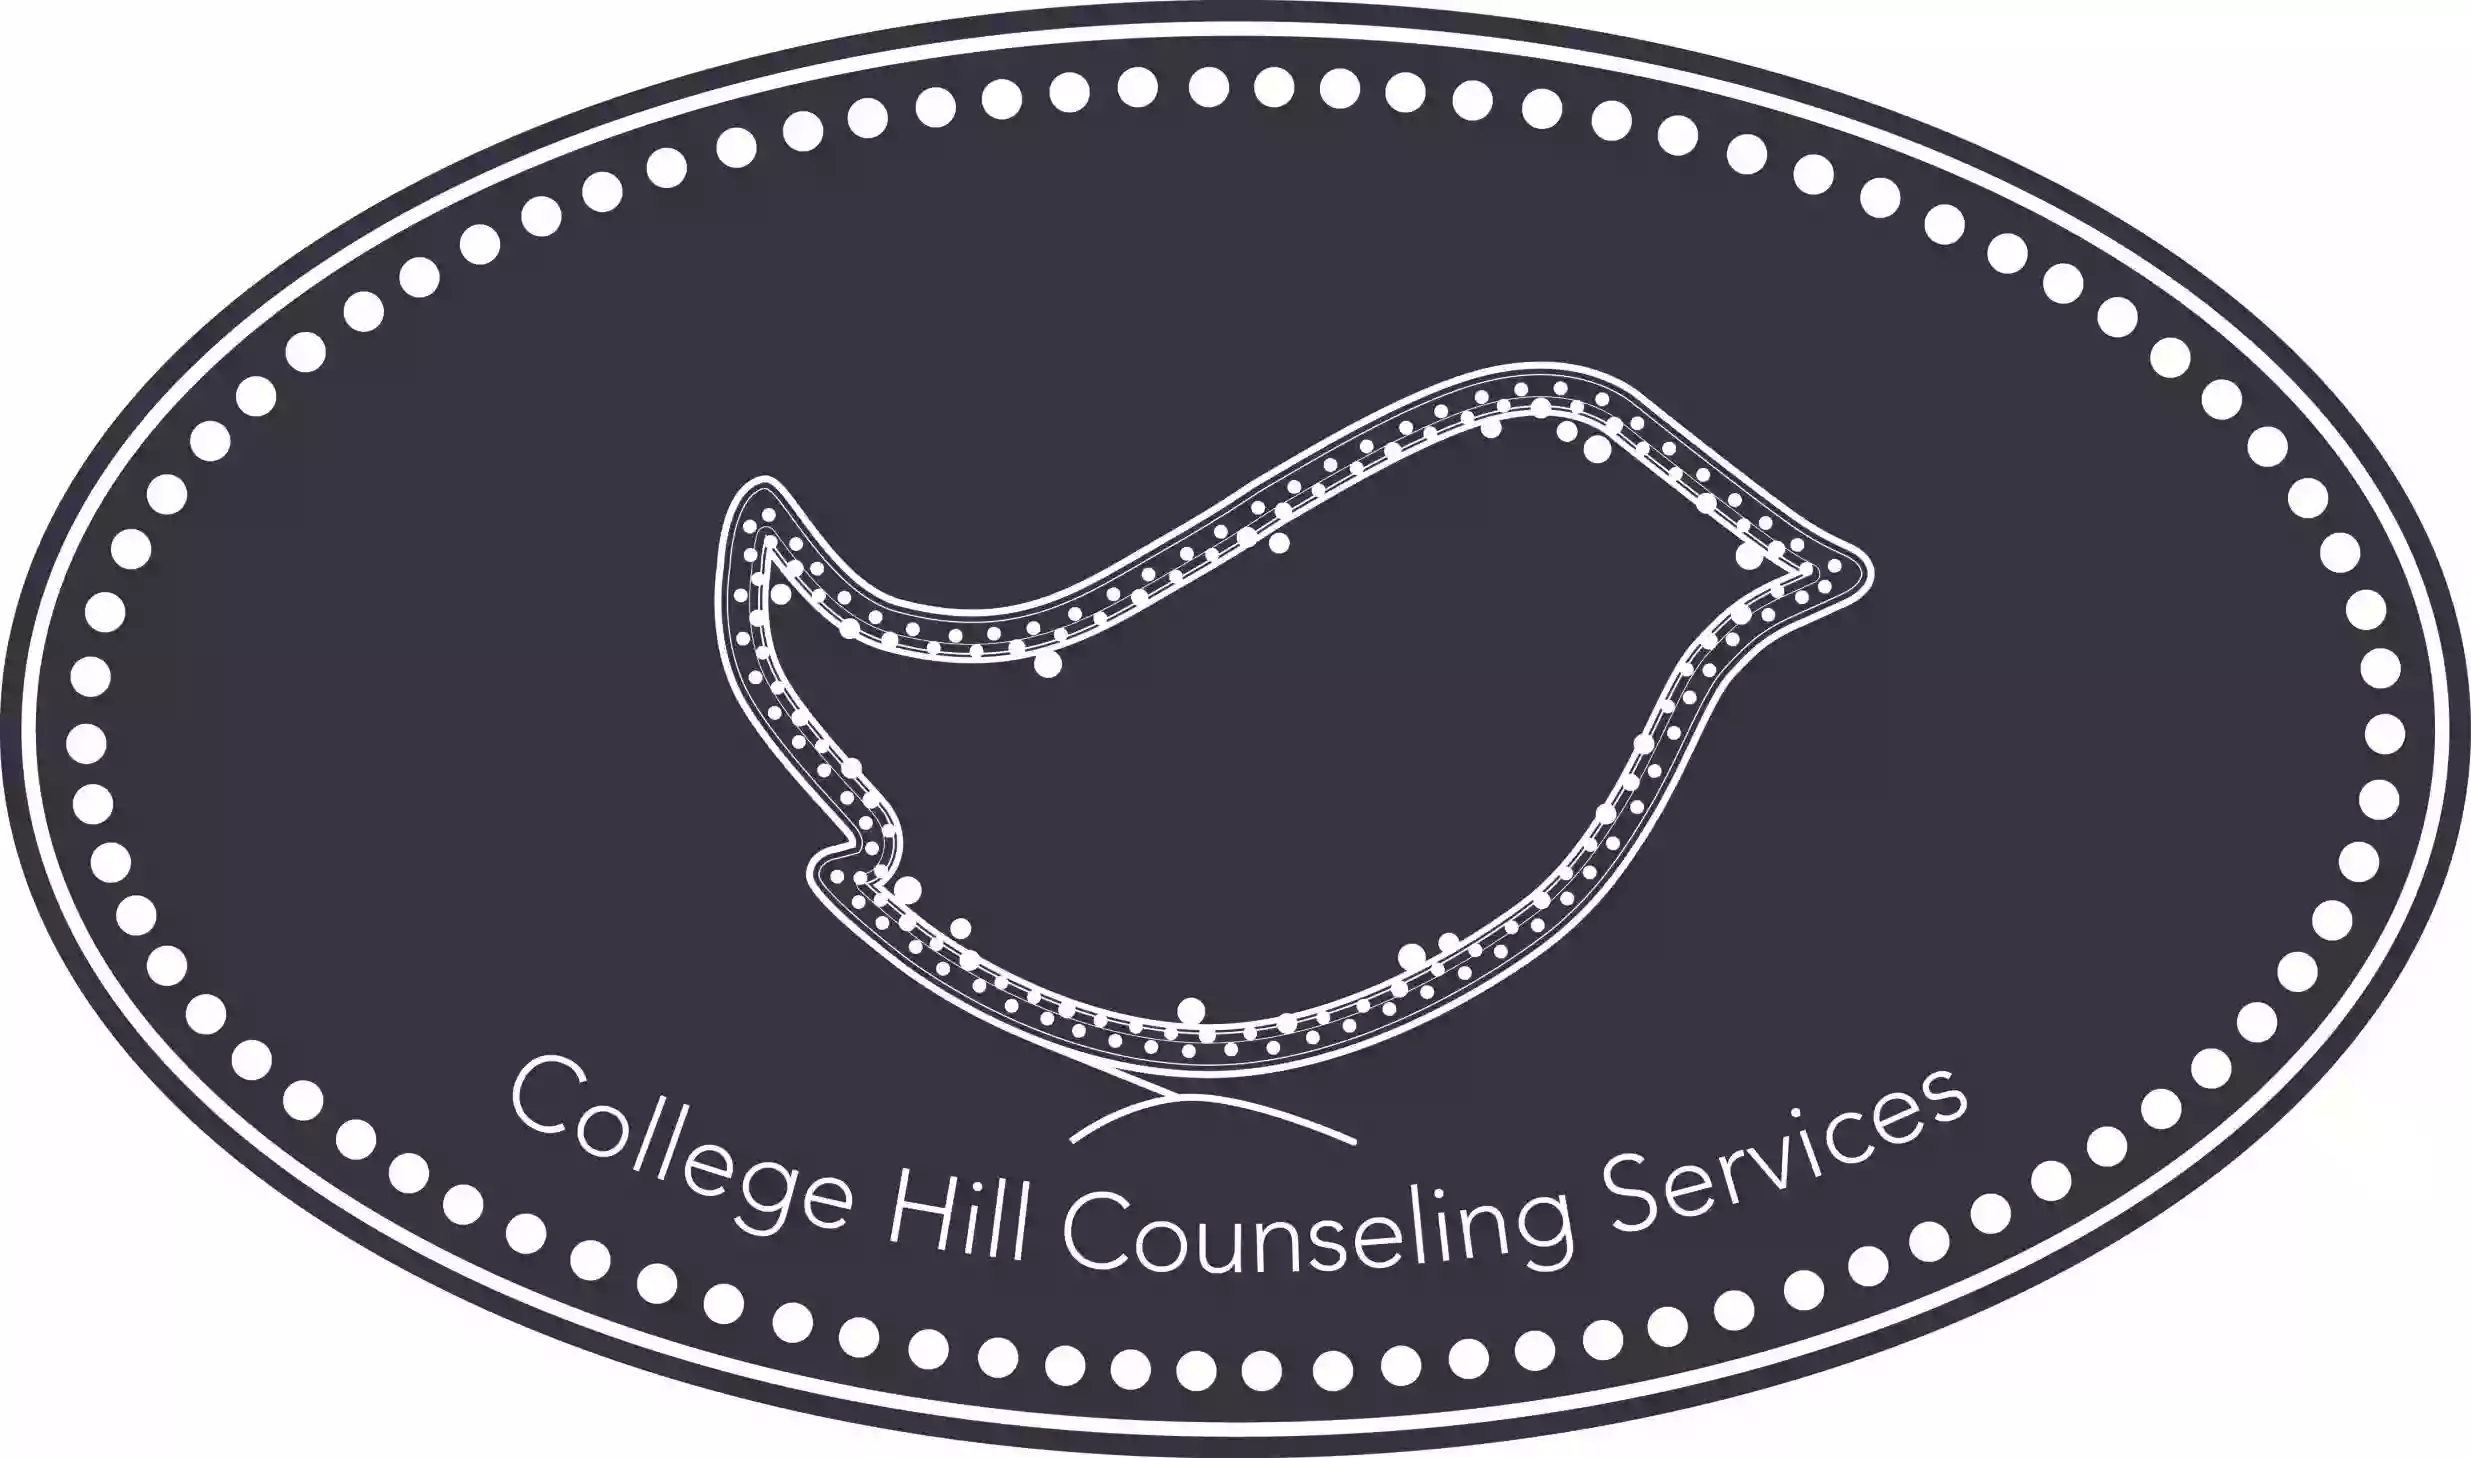 College Hill Counseling Services, LLC